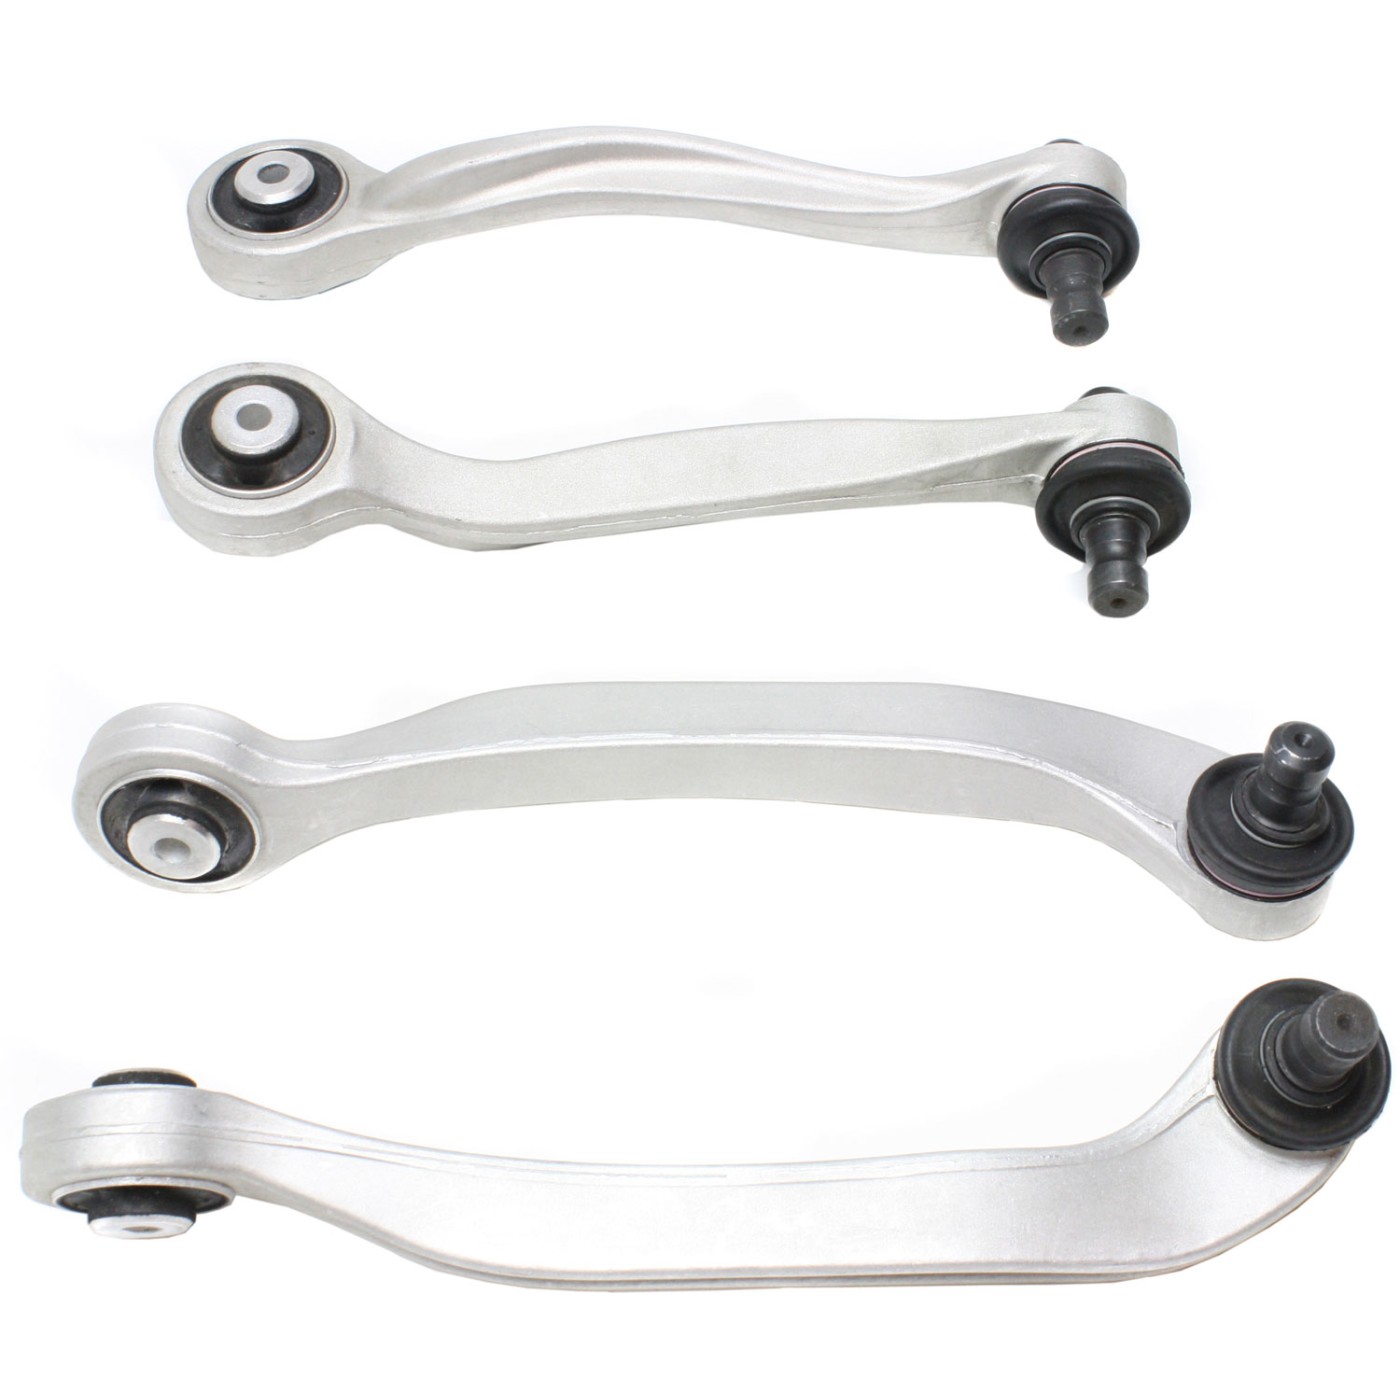 Control Arm Kit For 04 Audi A8 Quattro Front Upper Frontward And Rearward Set Of 4 Ebay 8721